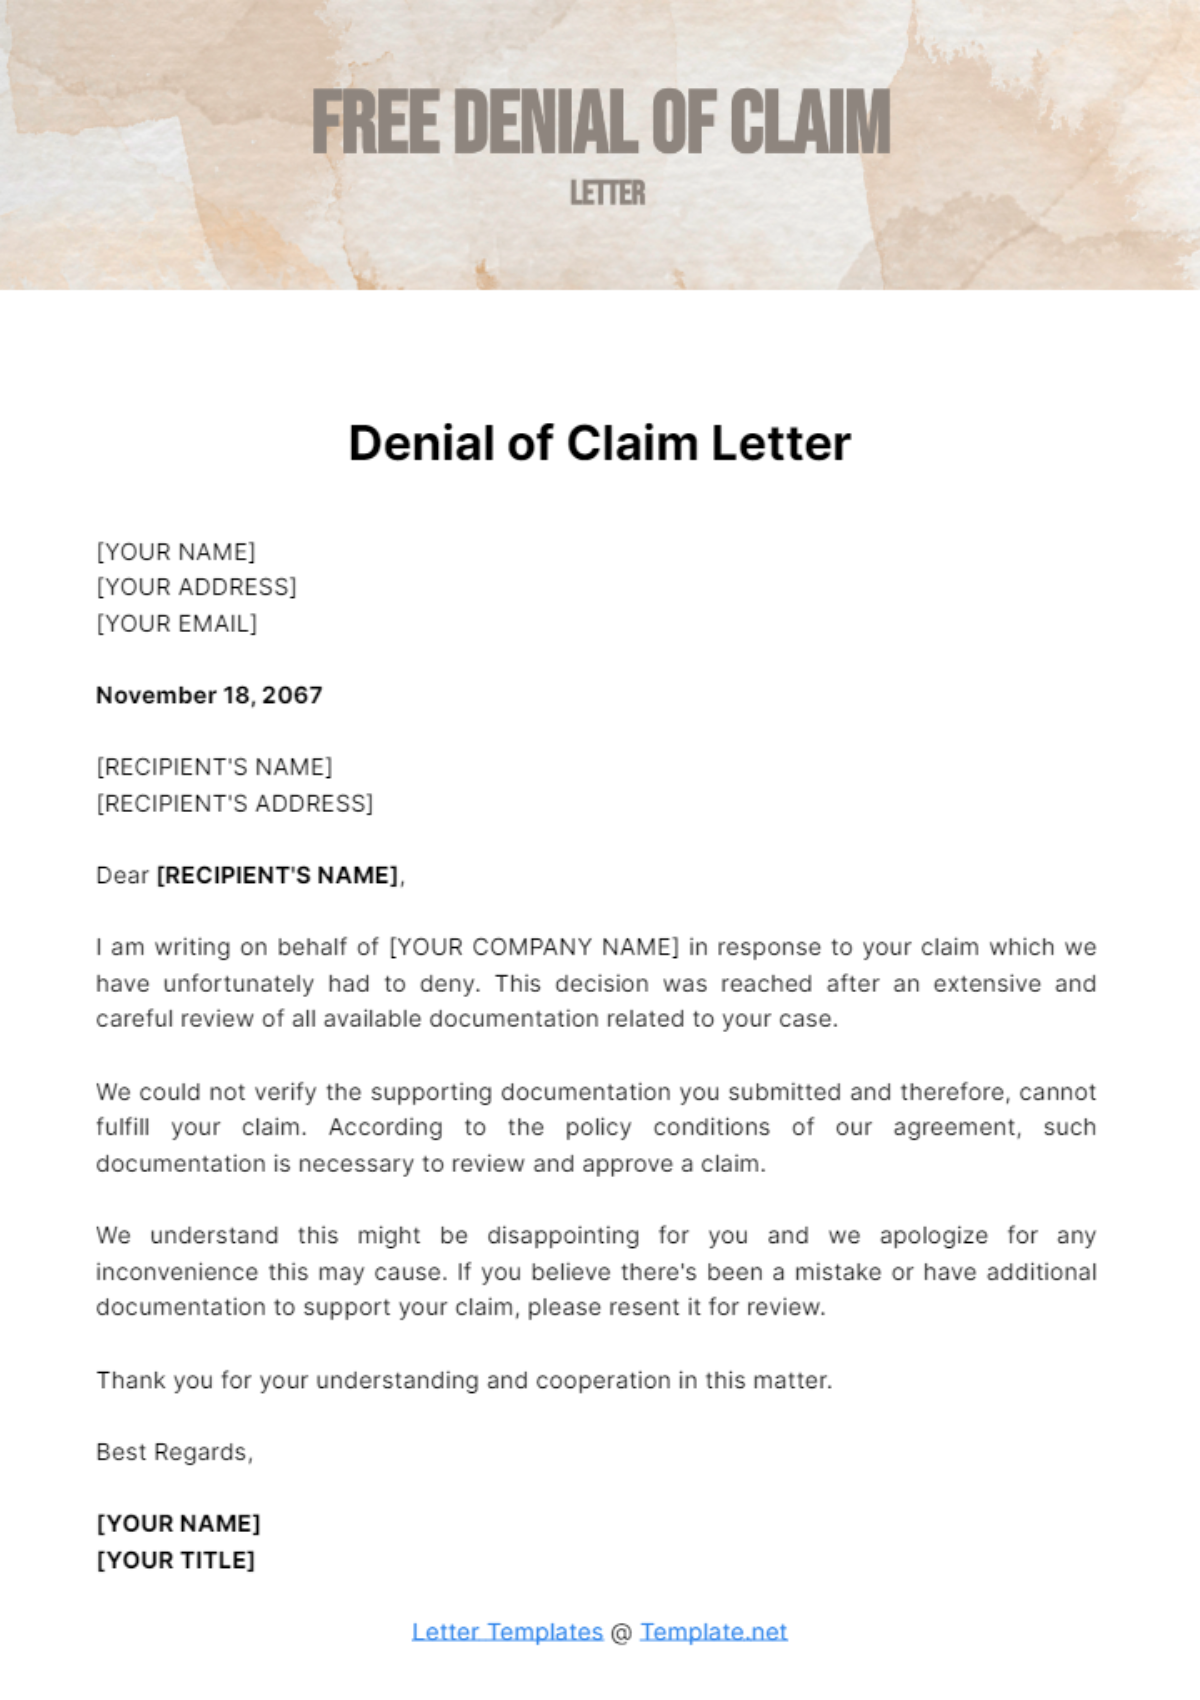 Free Denial of Claim Letter Template